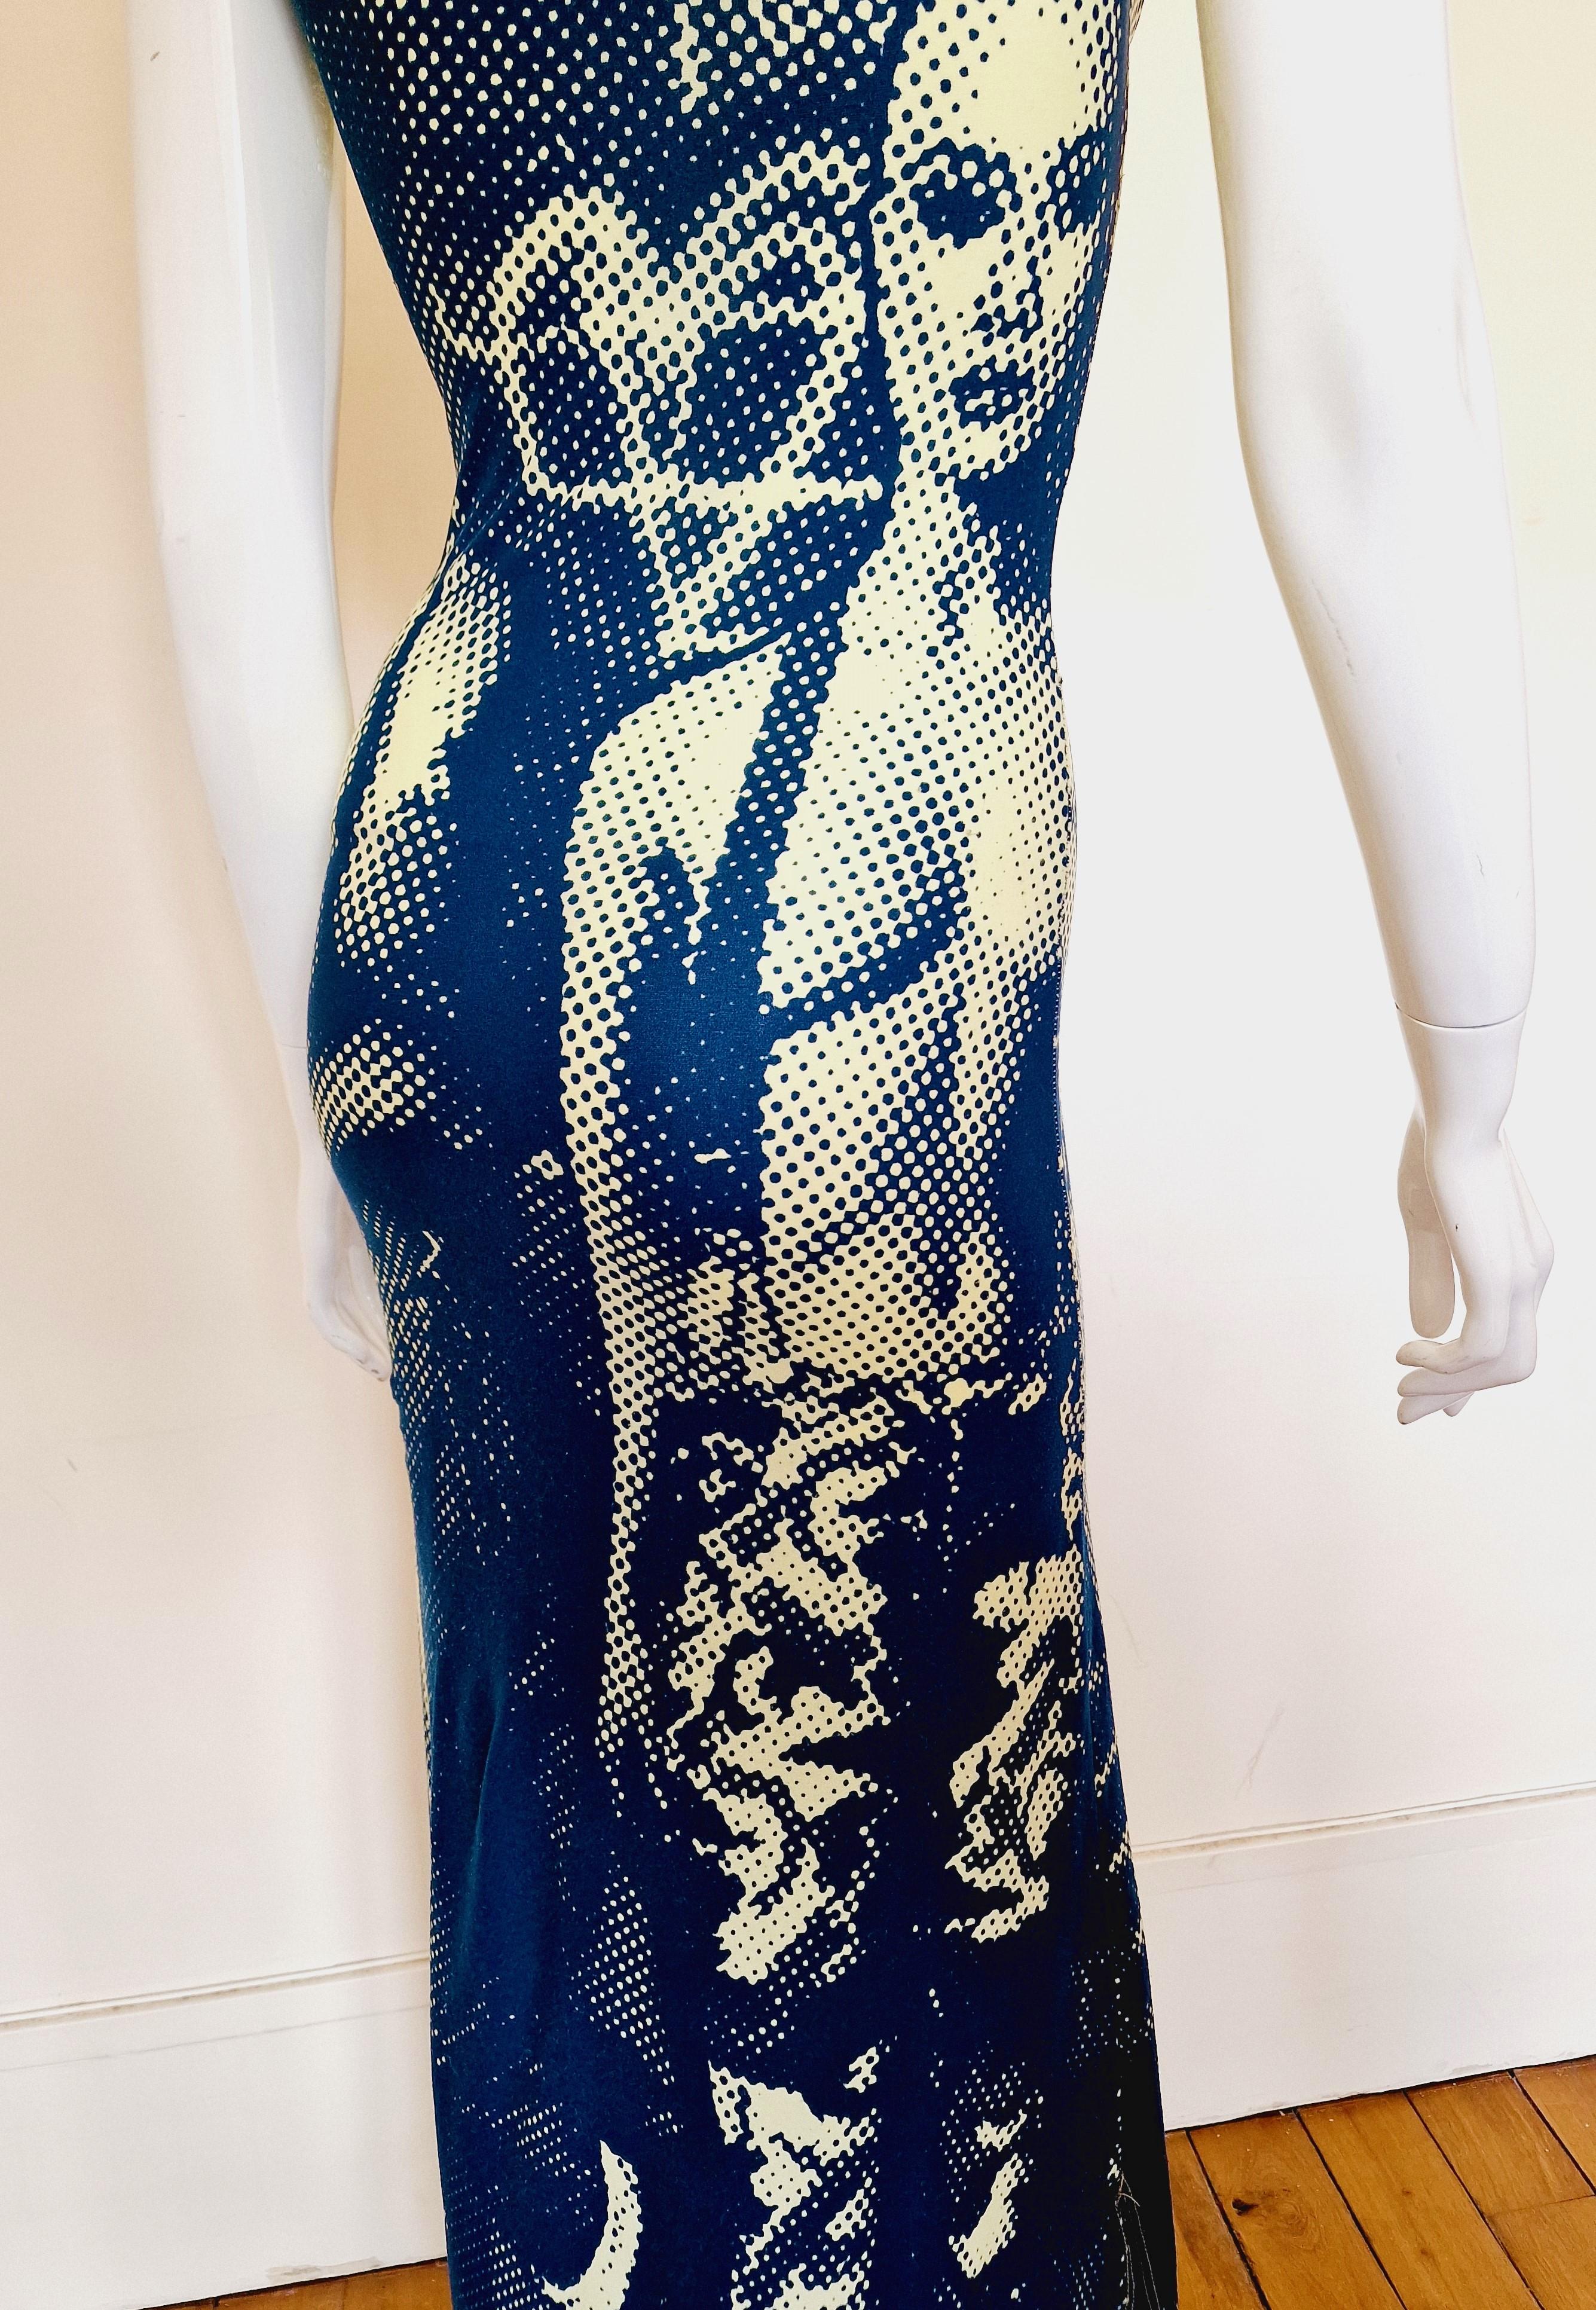 Jean Paul Gaultier Punk Fight Against Racism 1997 AW Print Tattoo Top Maxi Dress For Sale 10